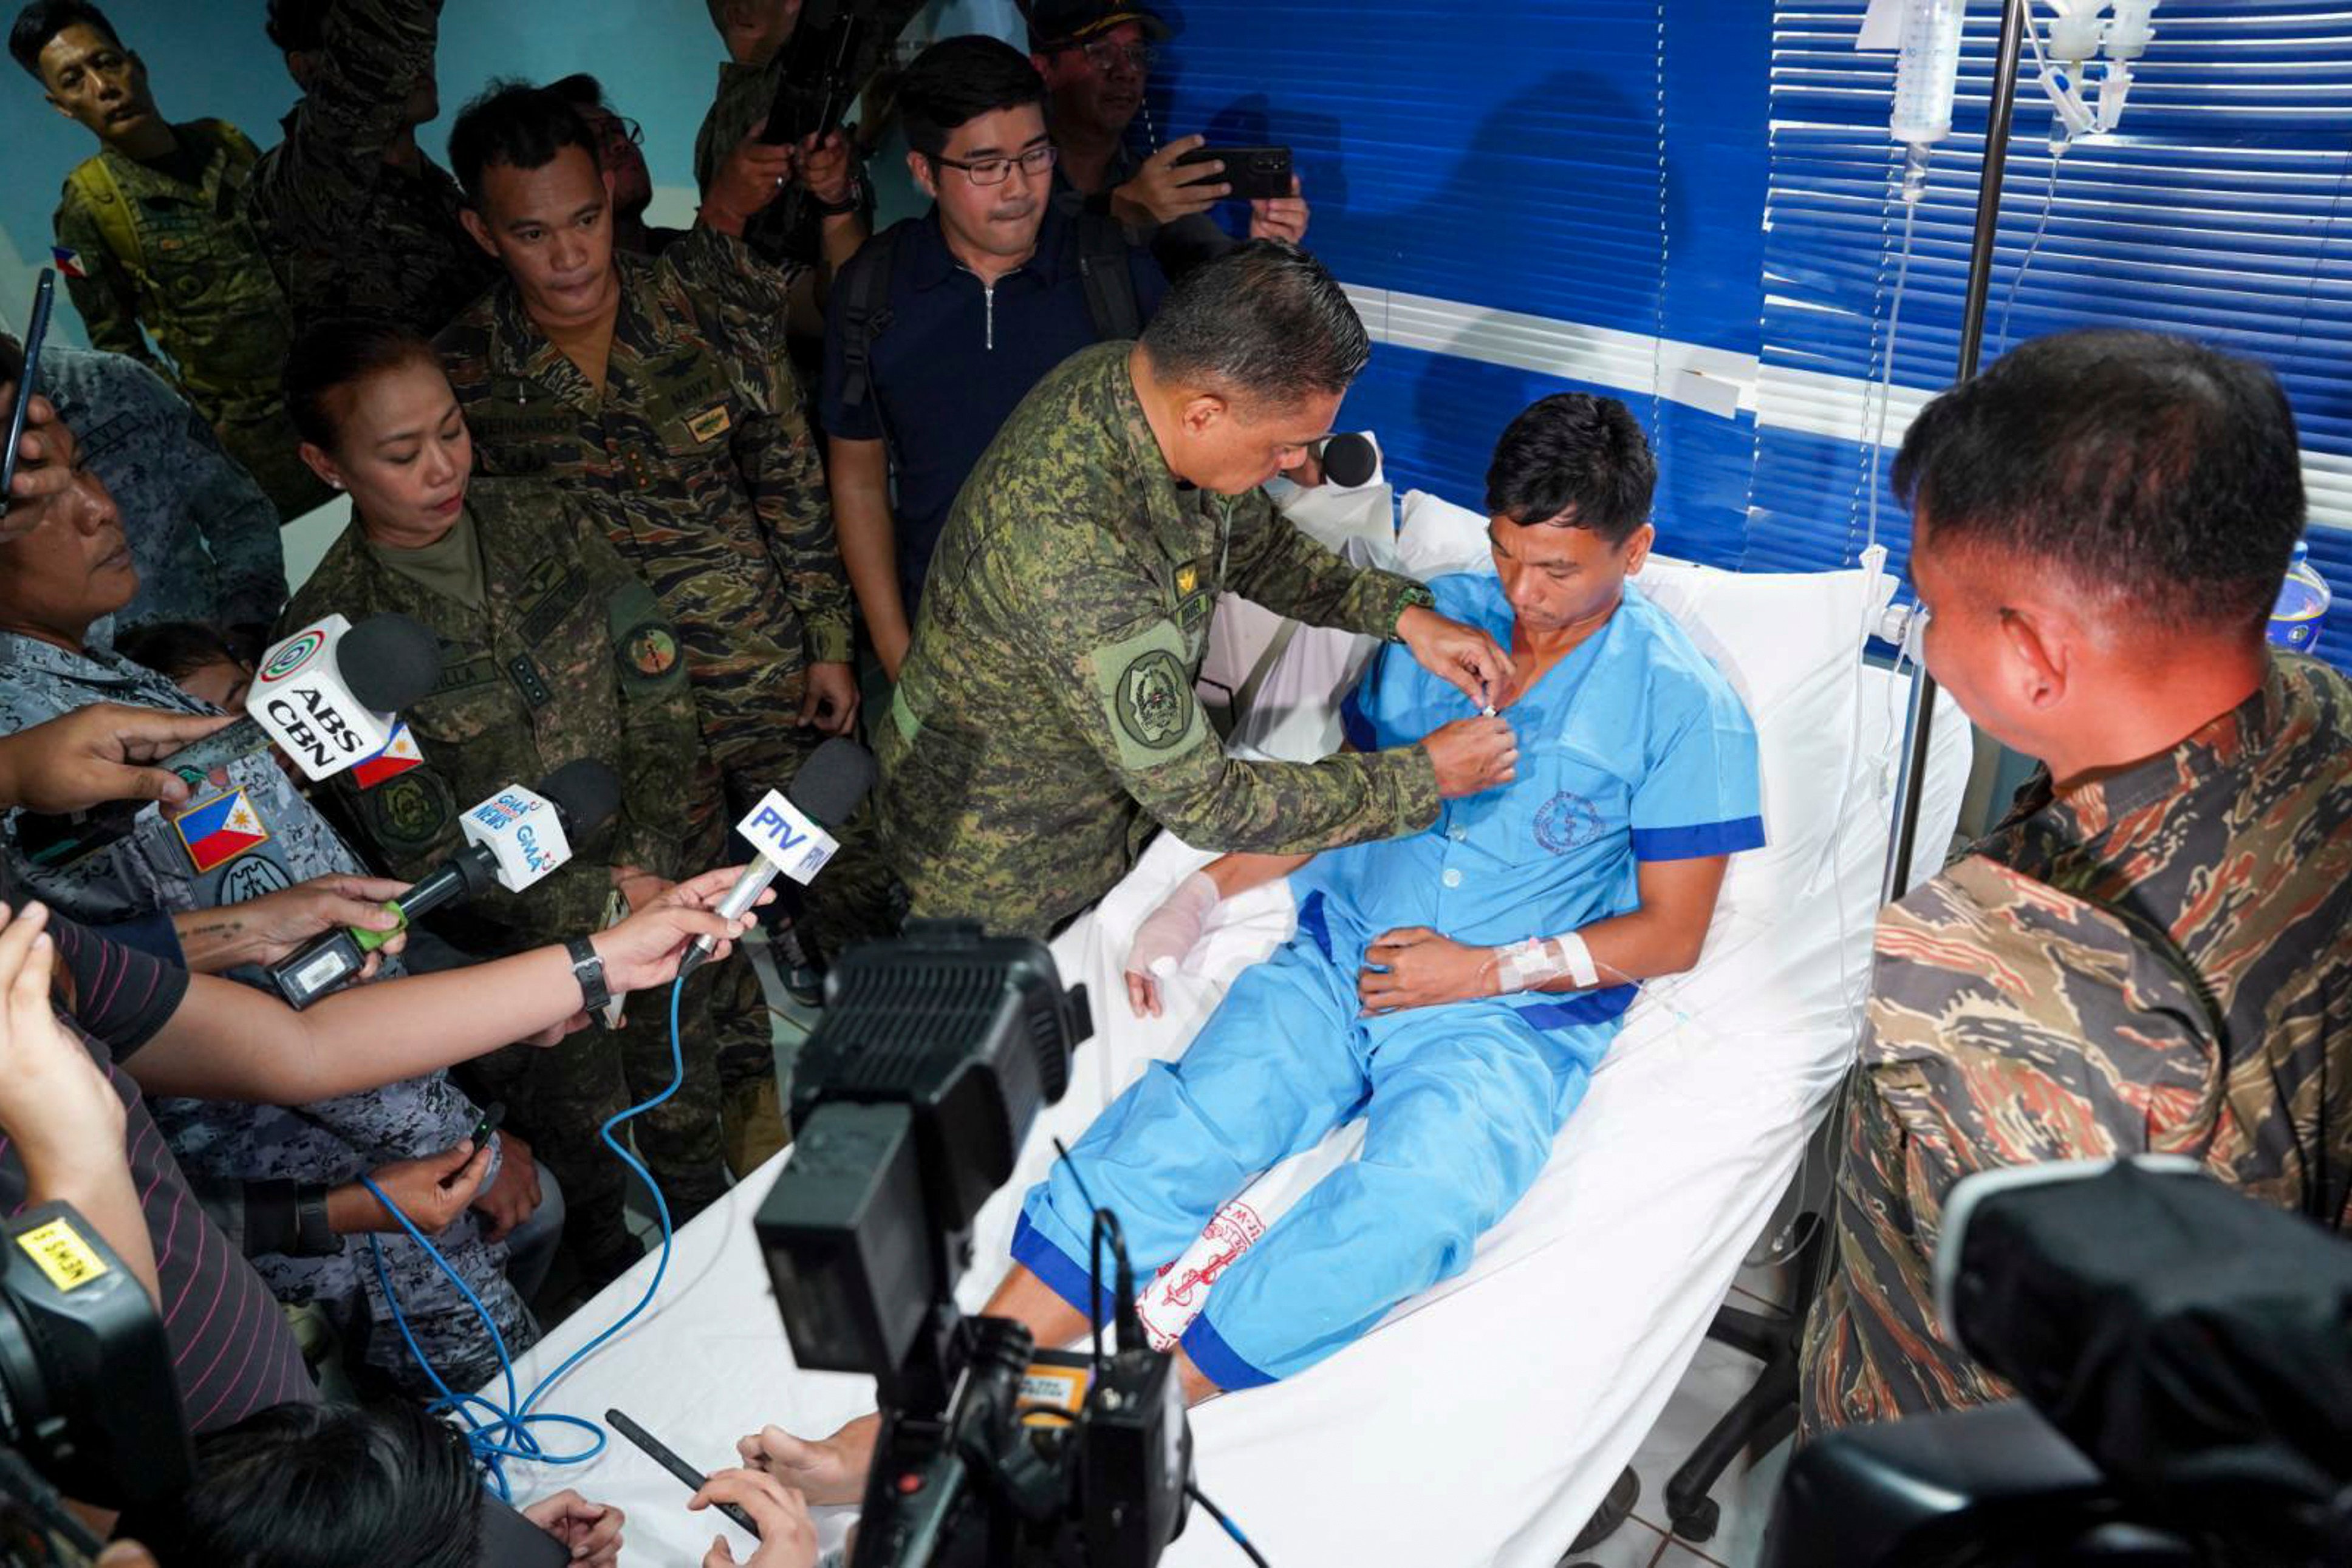 Philippine military chief General Romeo Brawner Jnr pins a medal on Jeffrey Facundo, who lost a thumb in the clash on June 17. Photo: Handout/Armed Forces of the Philippines/AP